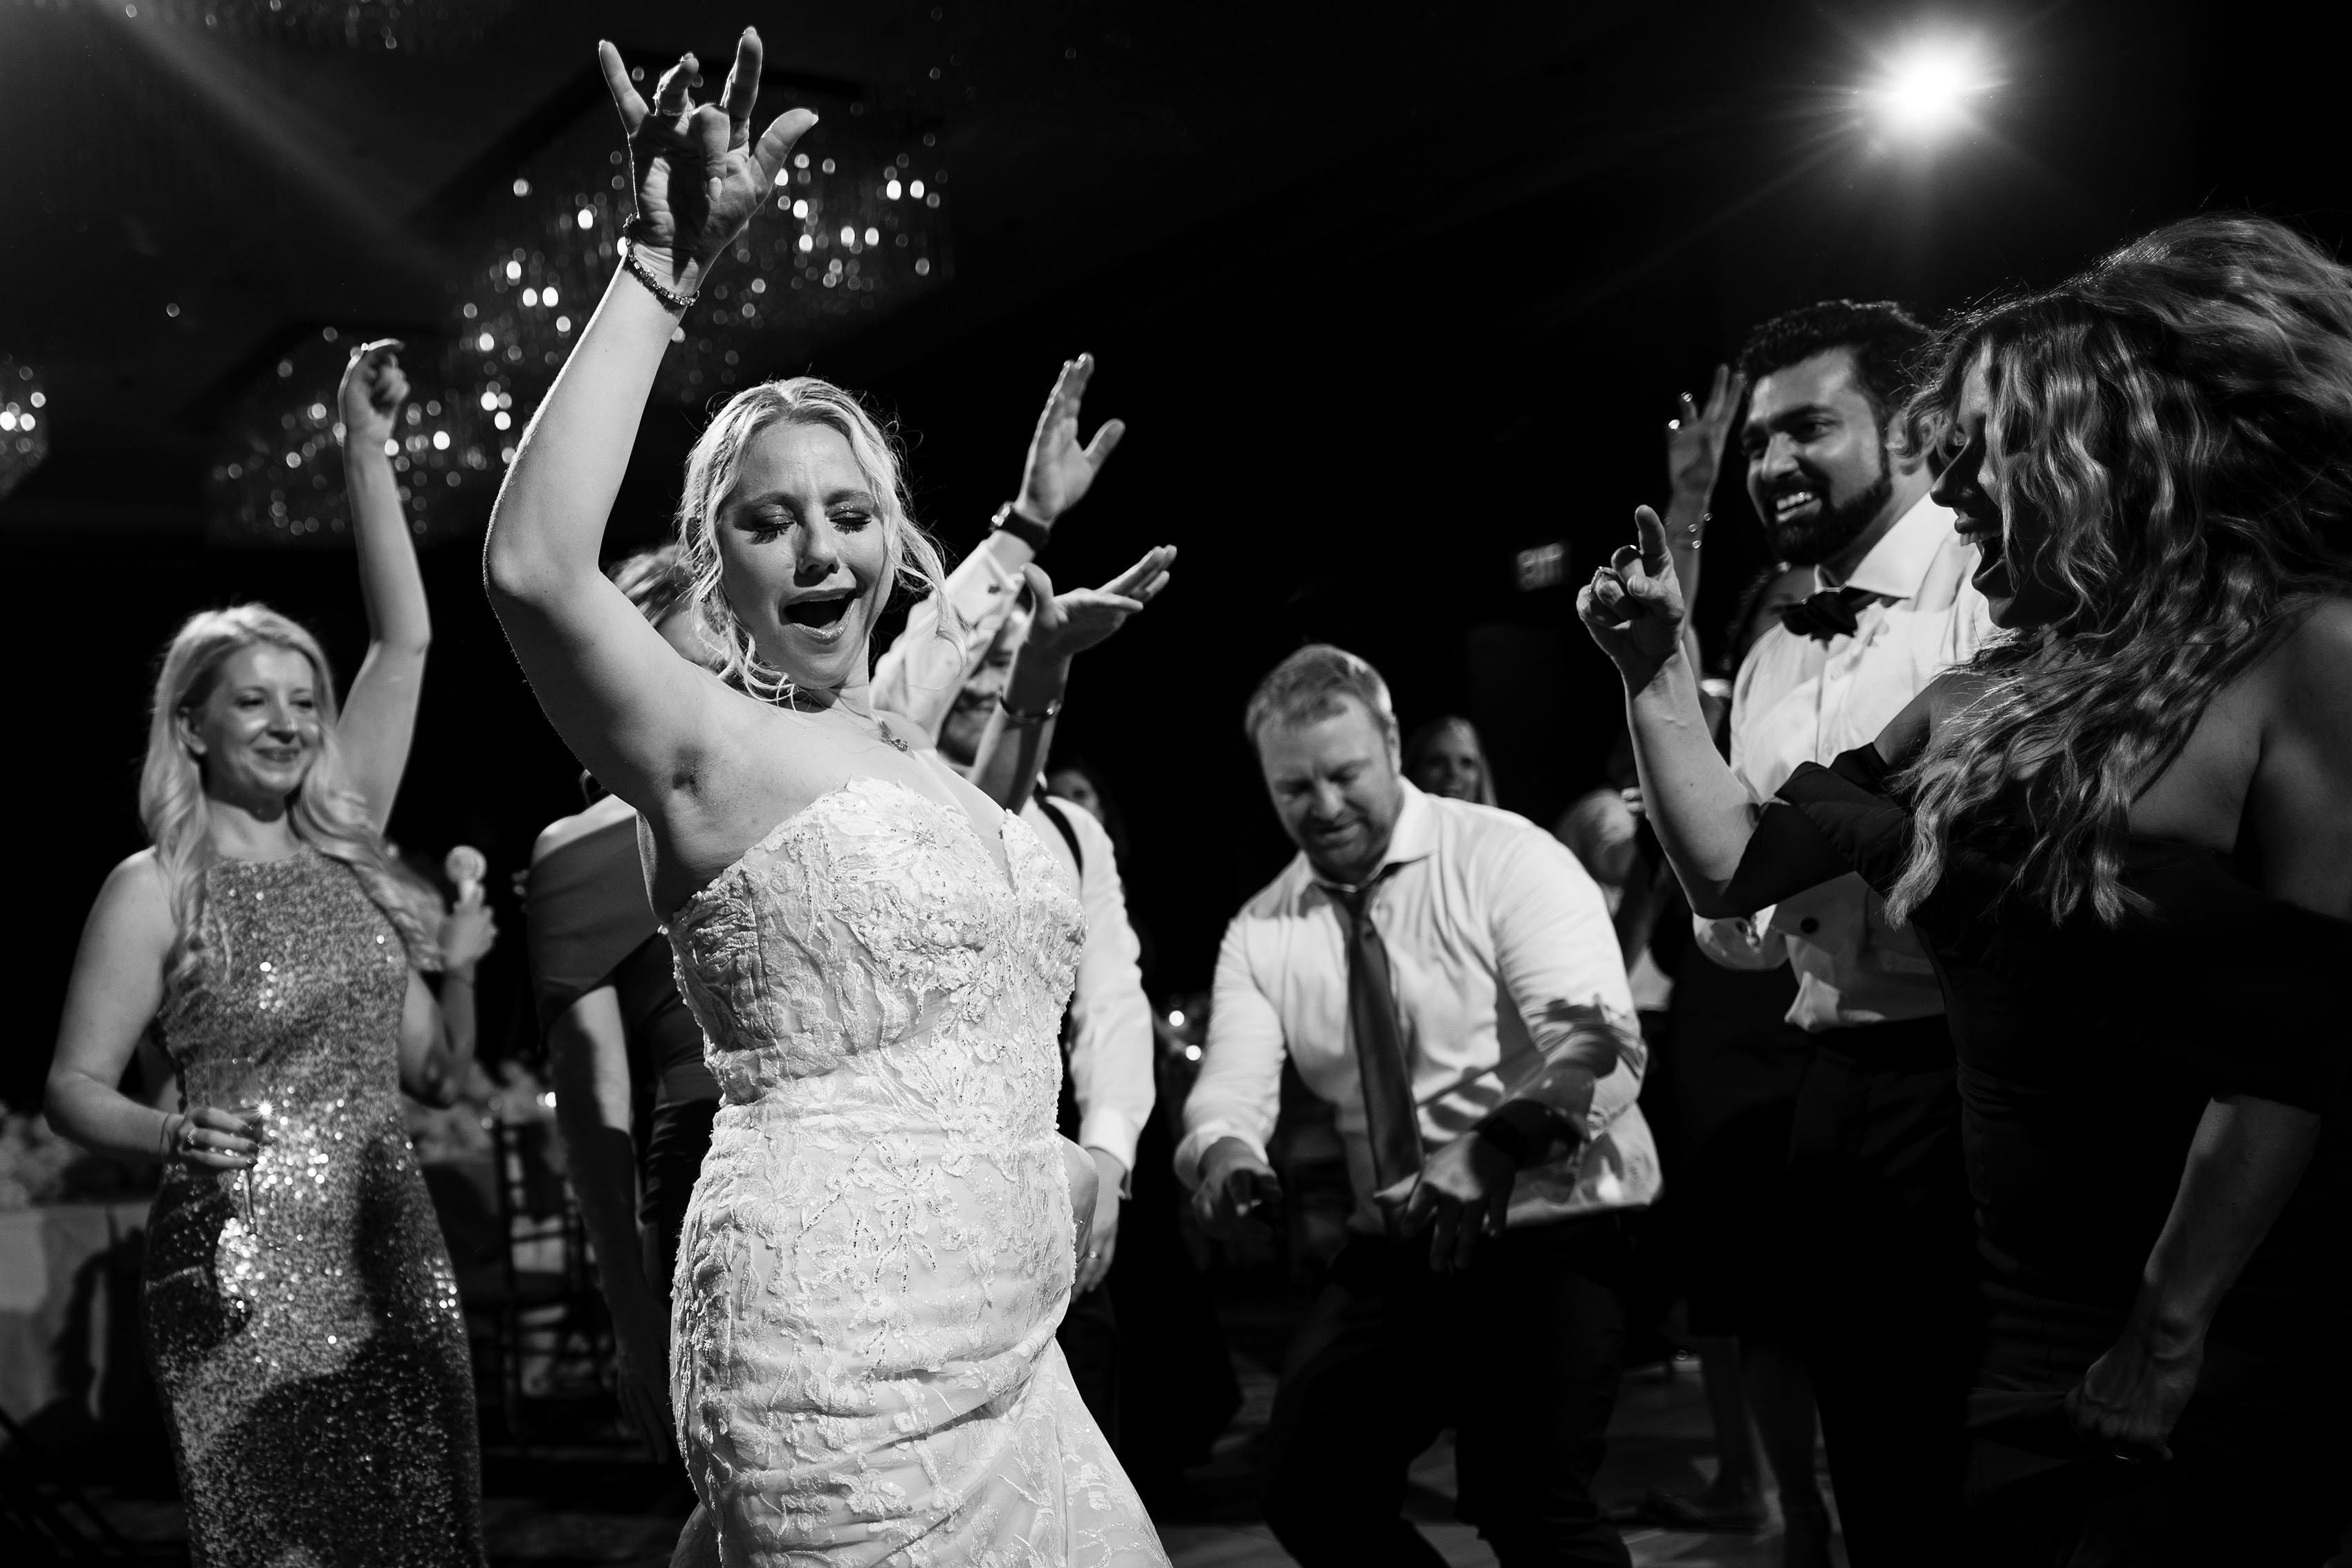 Guests dance during a wedding reception at Four Seasons Hotel Denver